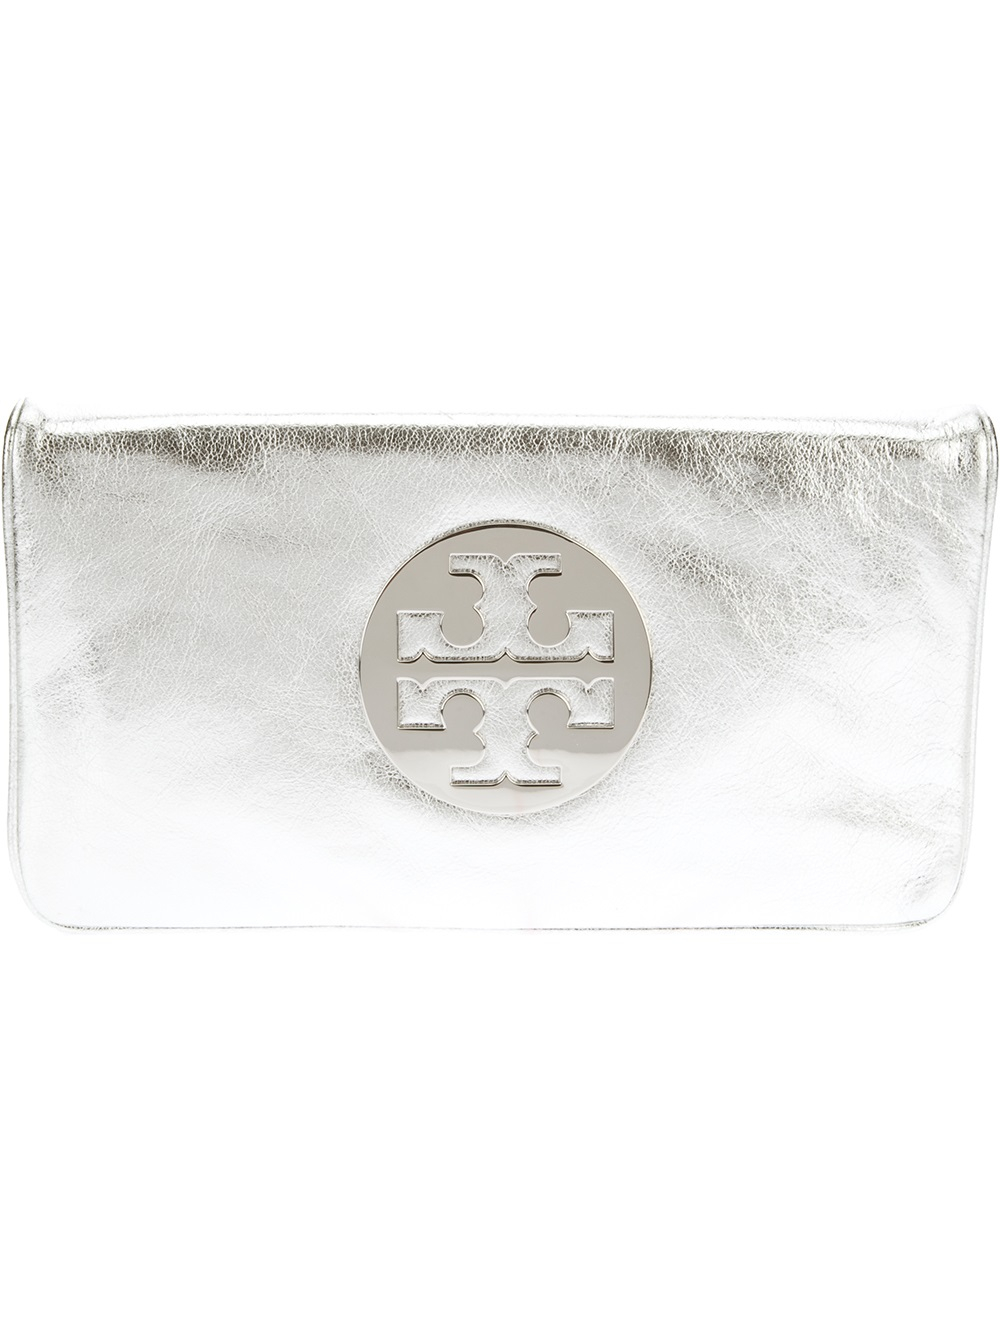 Tory Burch Bombe Reva Snake Embossed Leather Clutch - LabelCentric